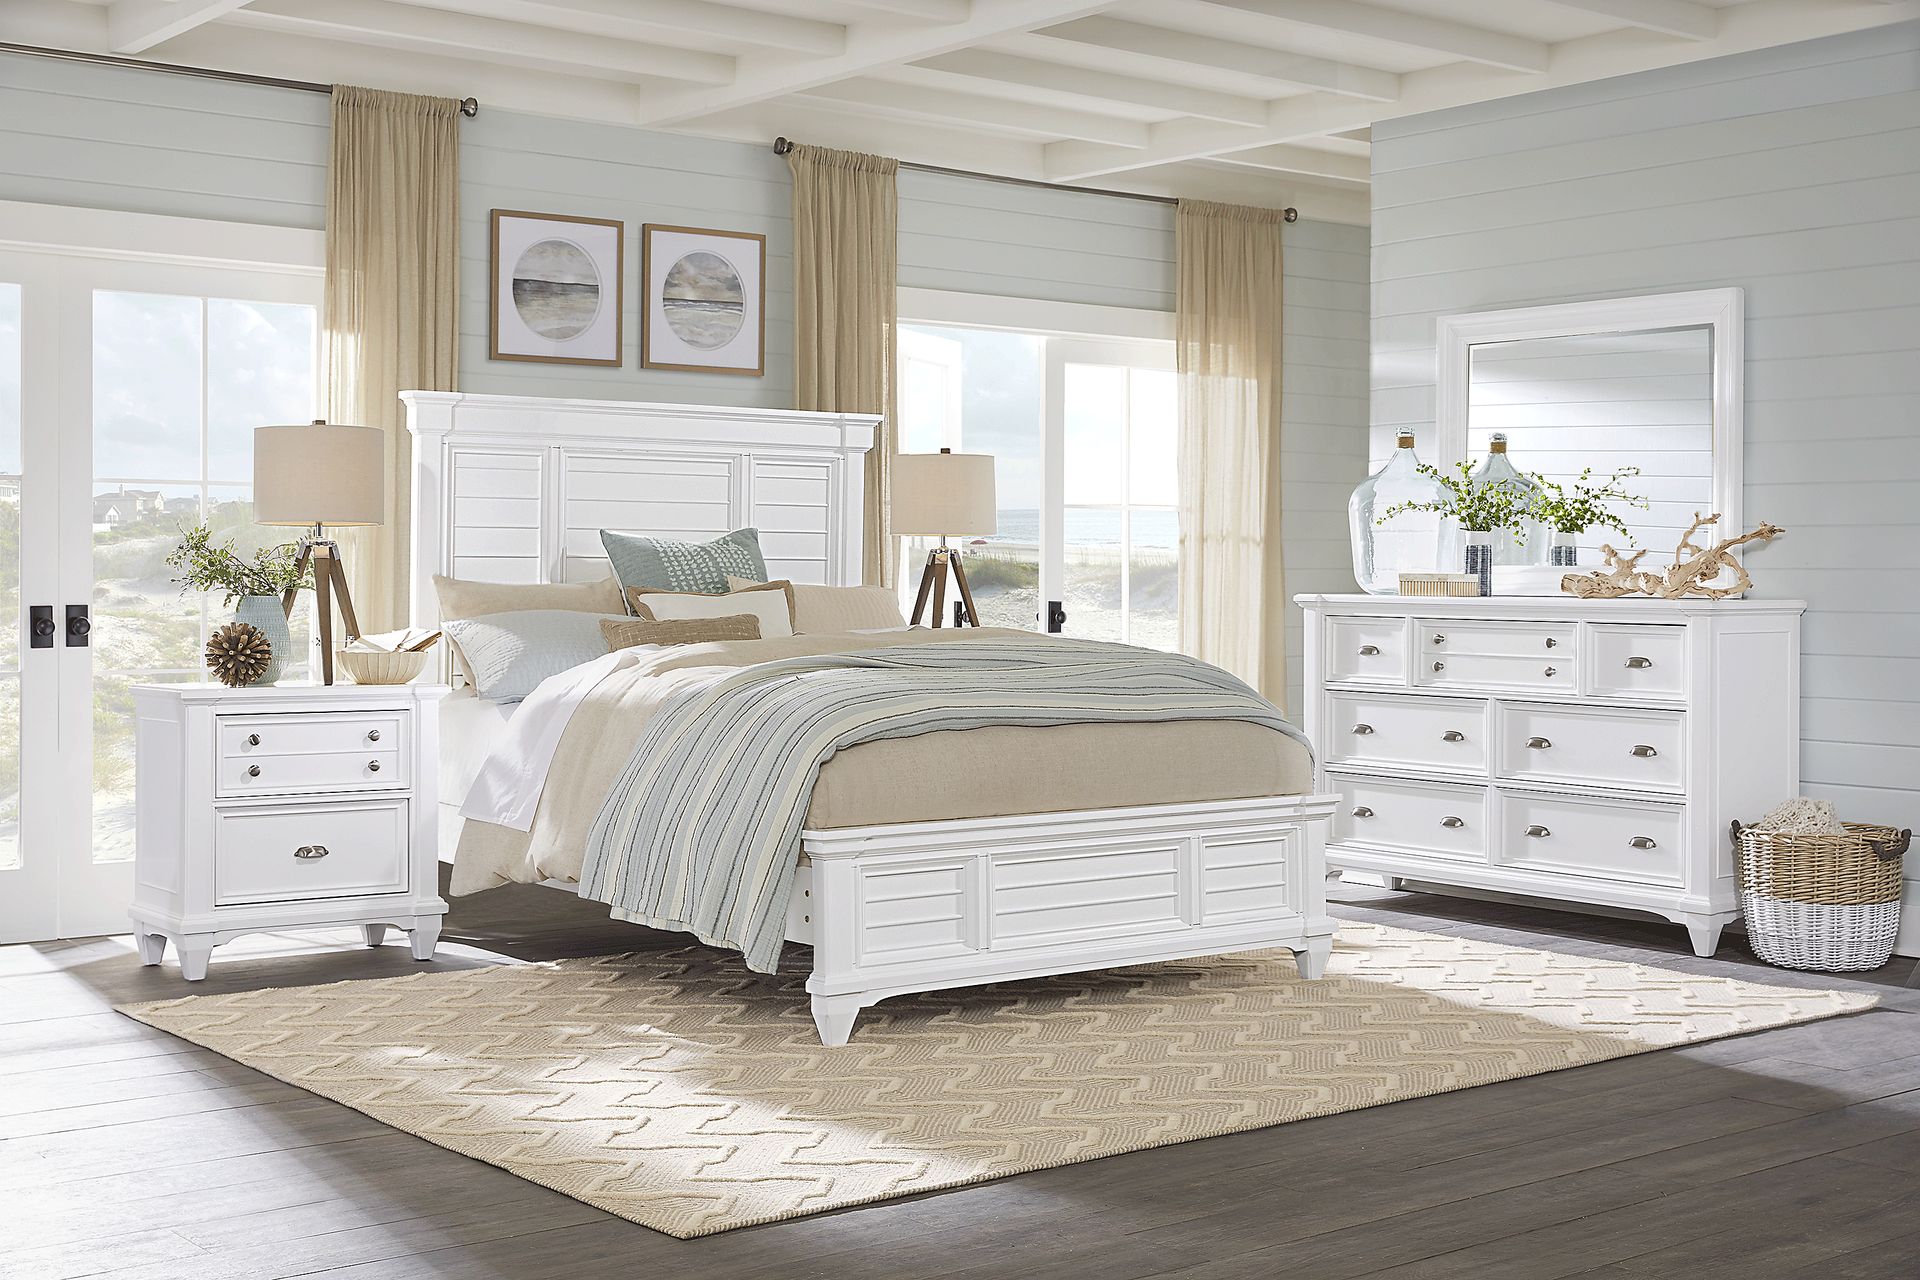 Hilton Head 7 Pc White Colors,White Queen Bedroom Set With Dresser ...